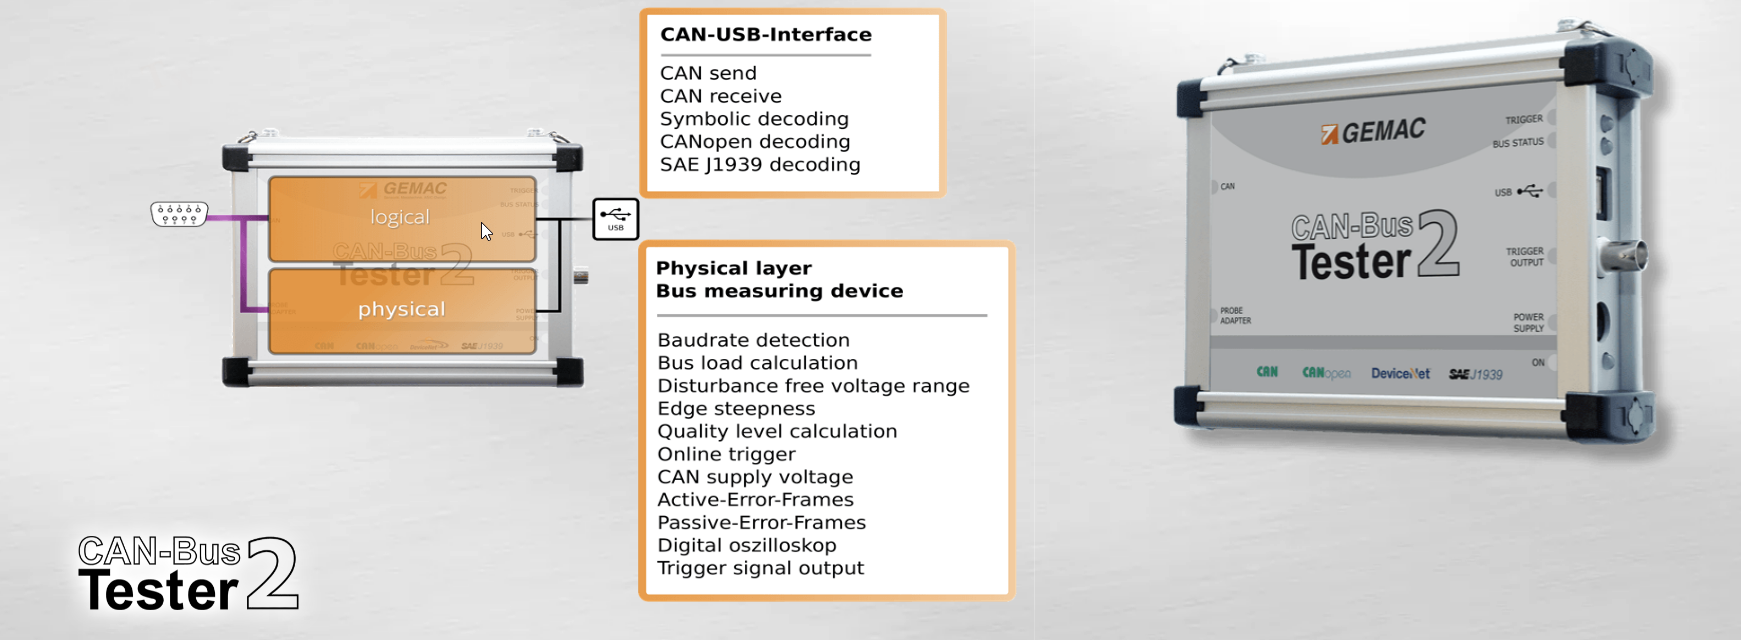 CAN-Bus Tester 2